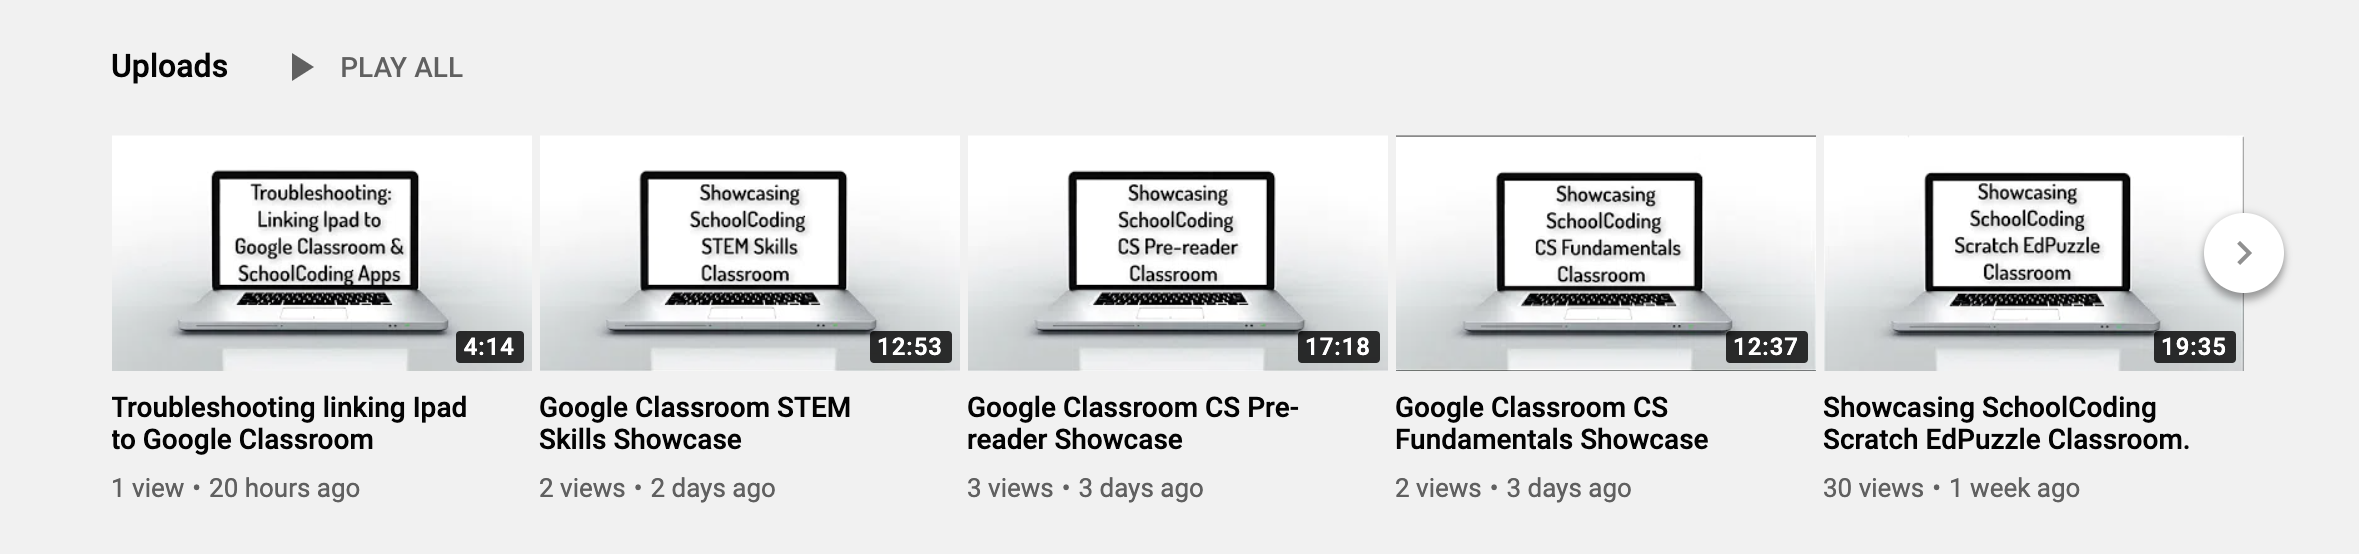 SchoolCoding - Visit our You Tube Channel